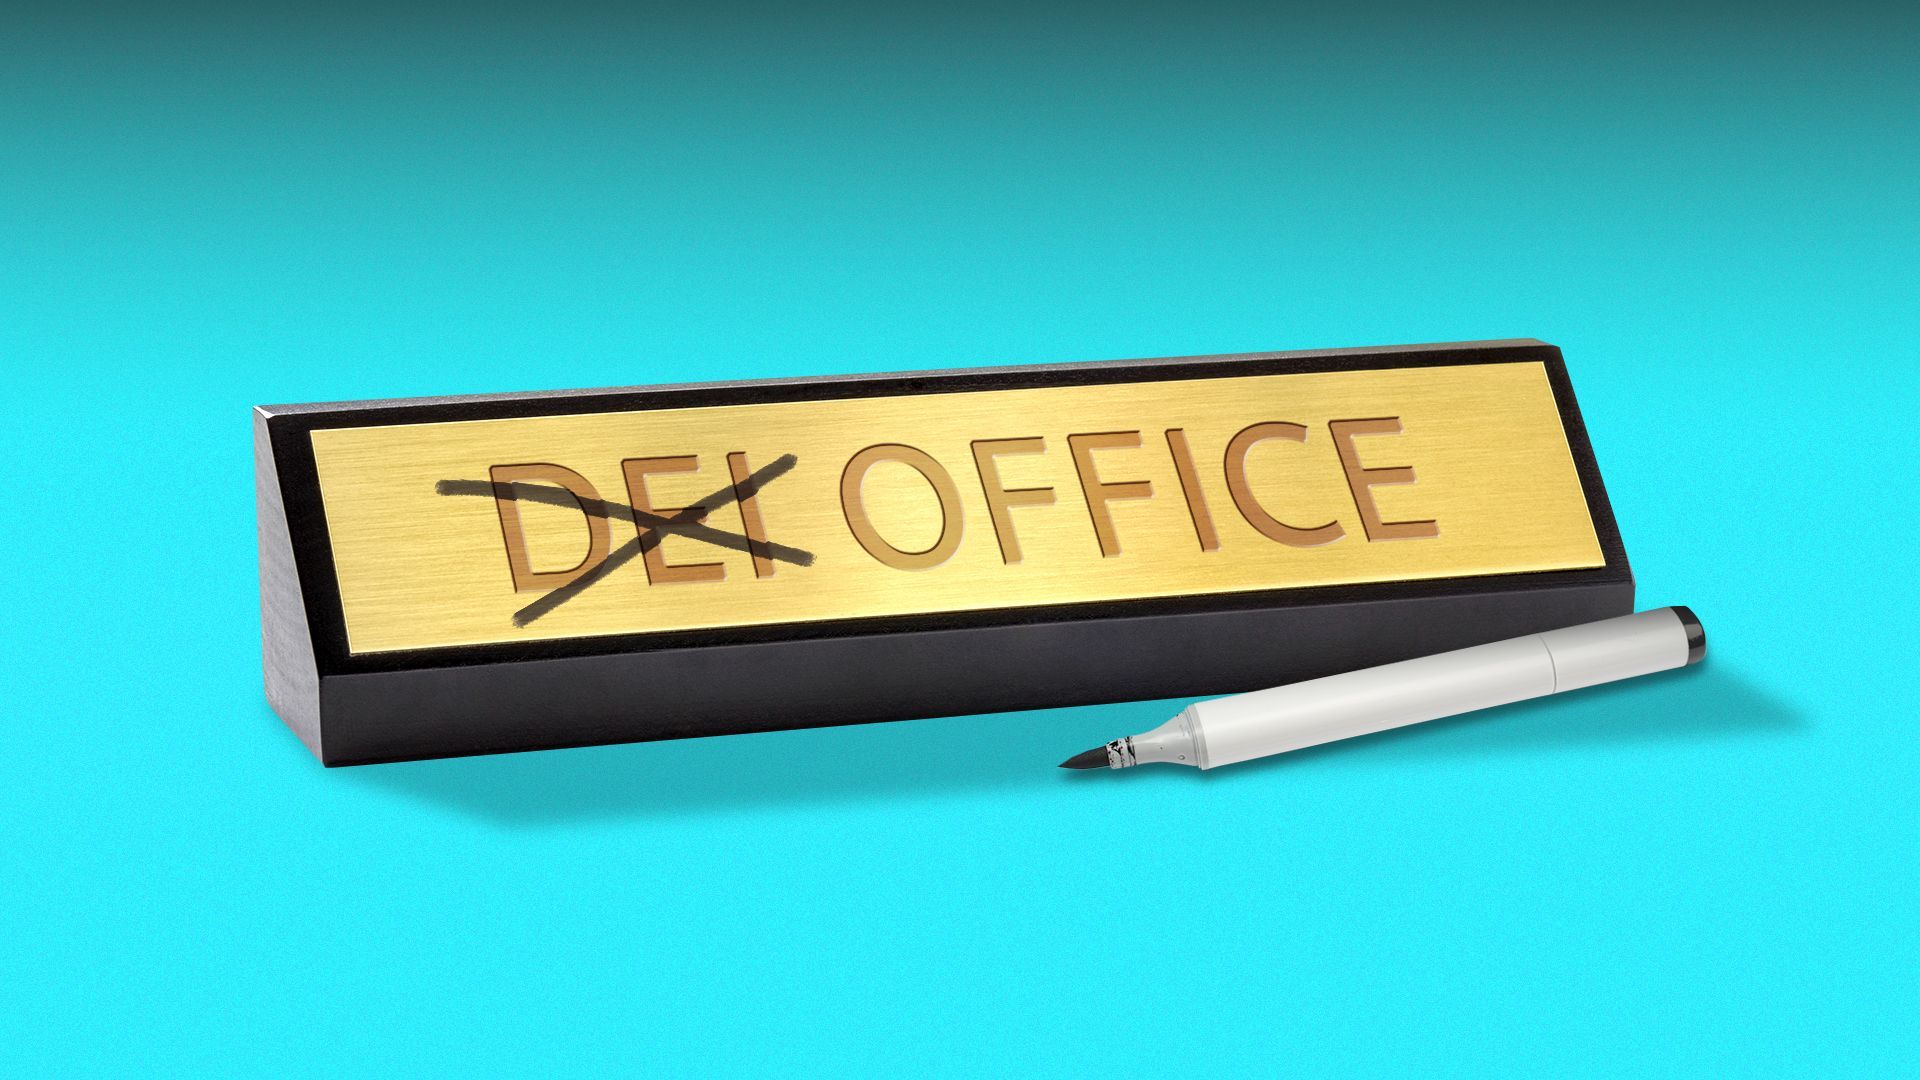 Illustration of a desk nameplate labeled "DEI OFFICE," with "DEI" crossed out with a marker.